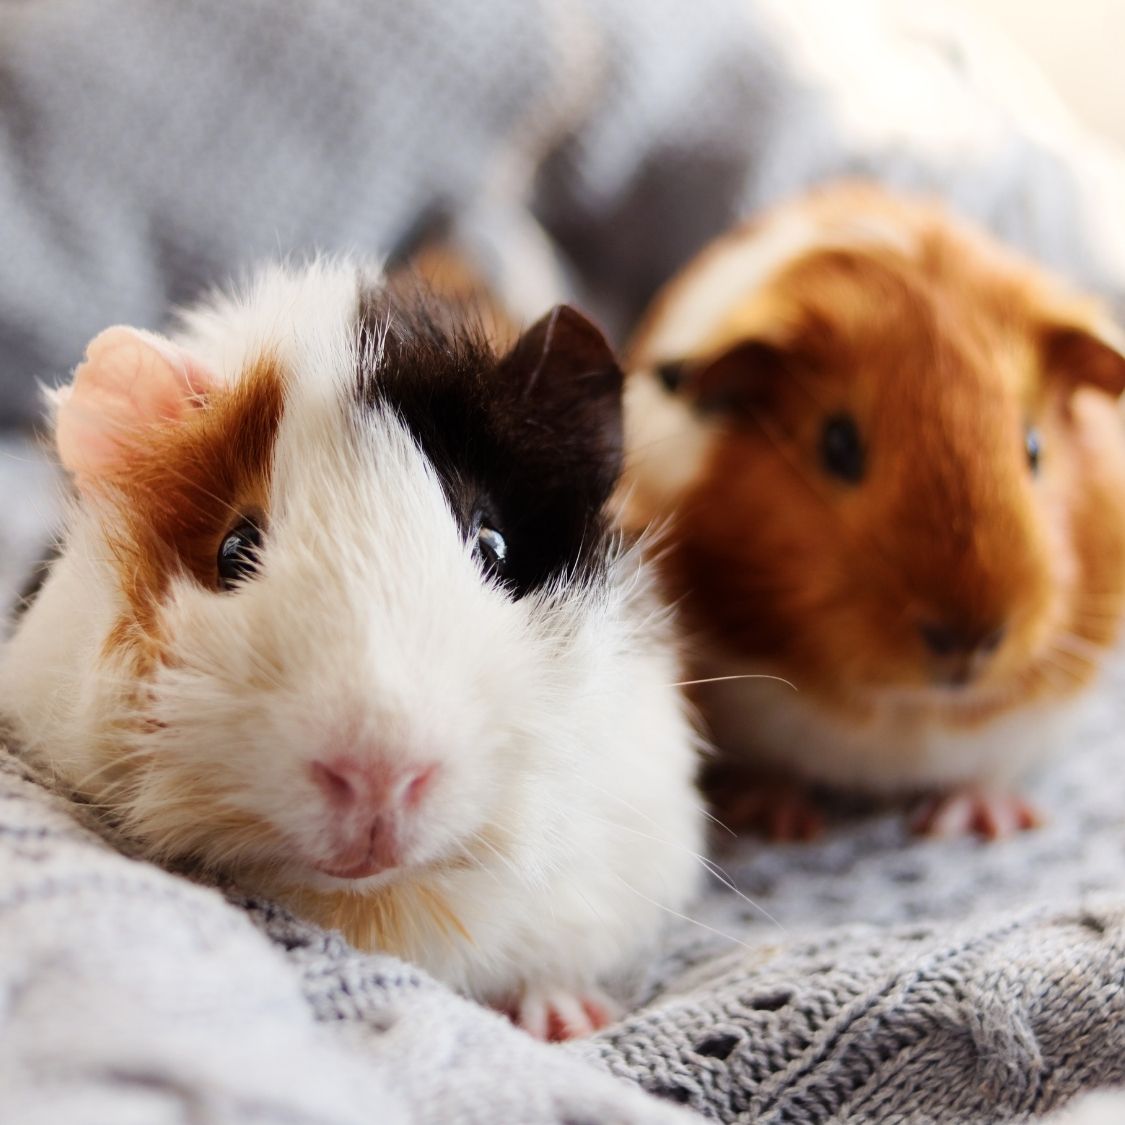 Considerations Before Owning a Small Pet